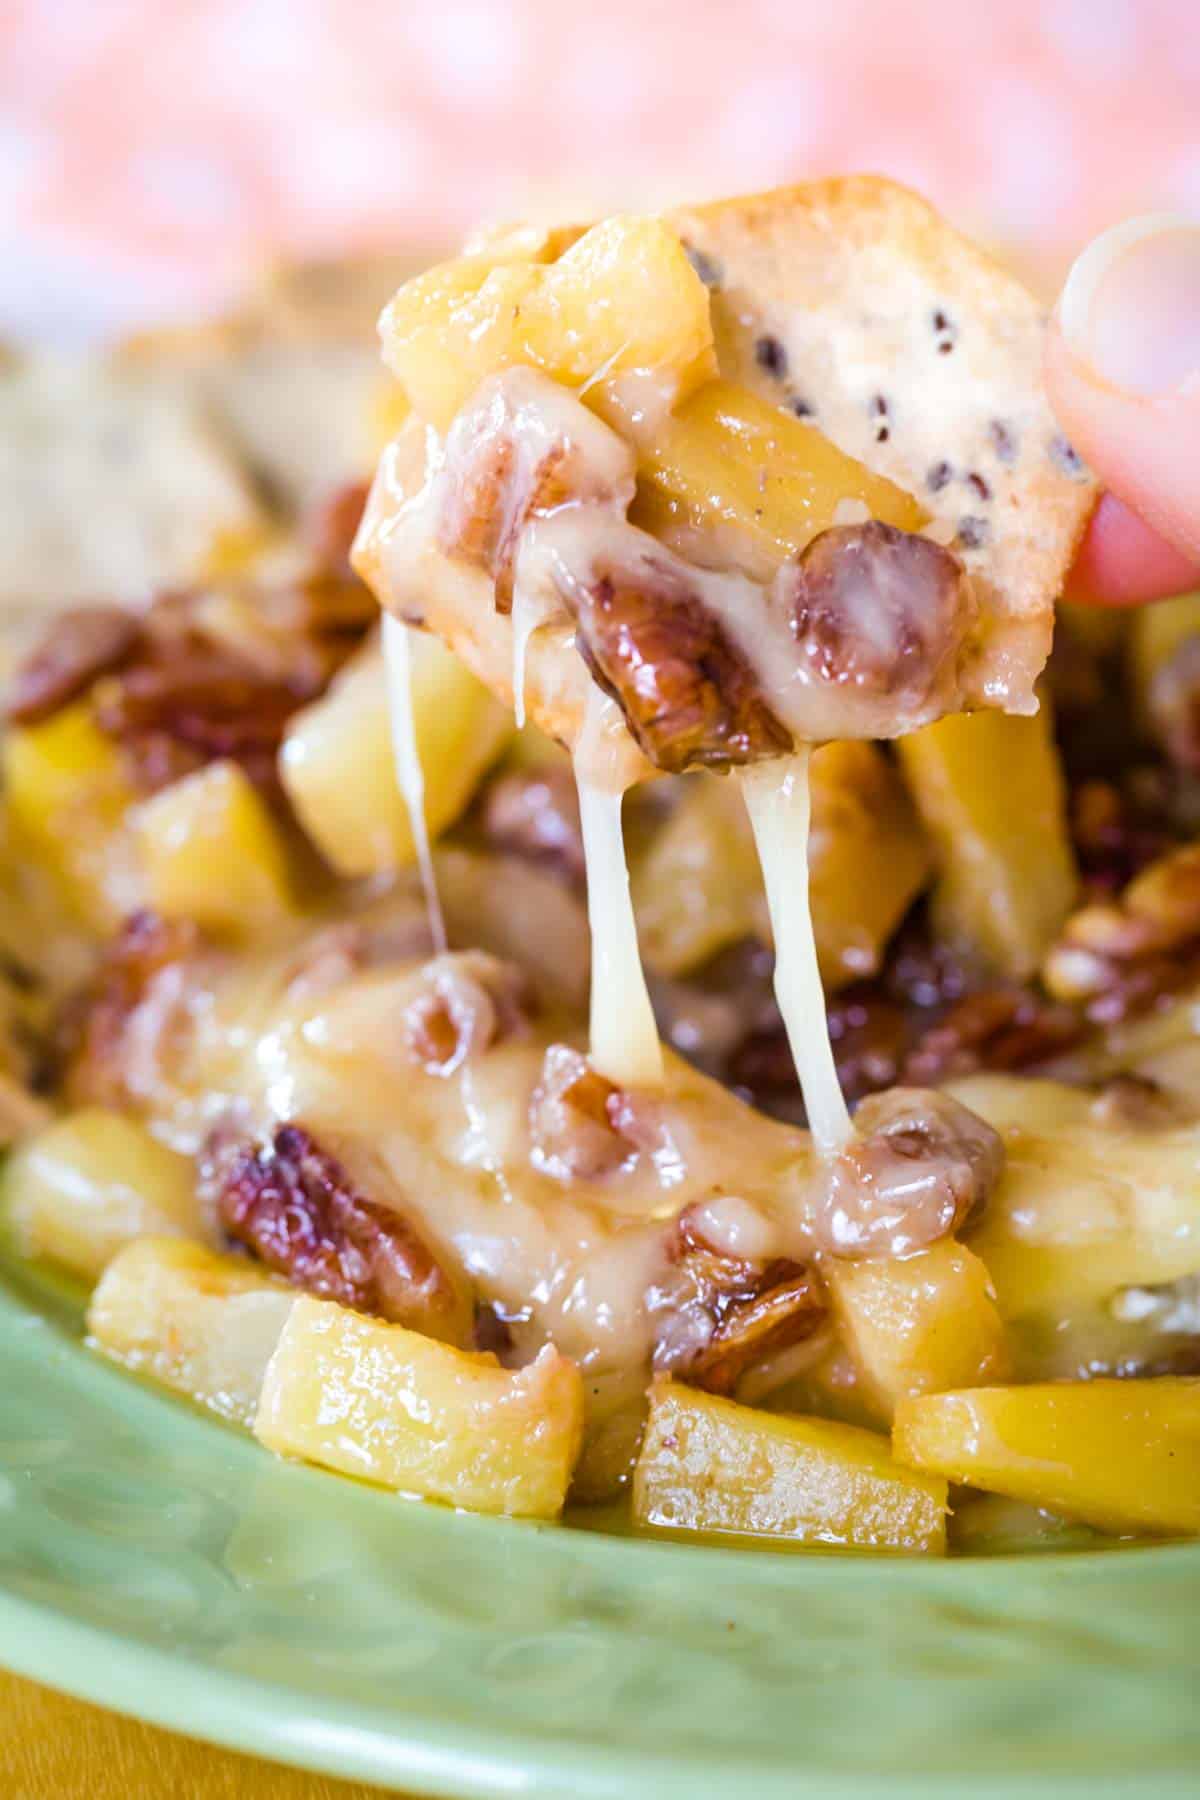 A cracker with some pineapple tidbits and chopped pecans on it with melty Brie cheese dripping off.